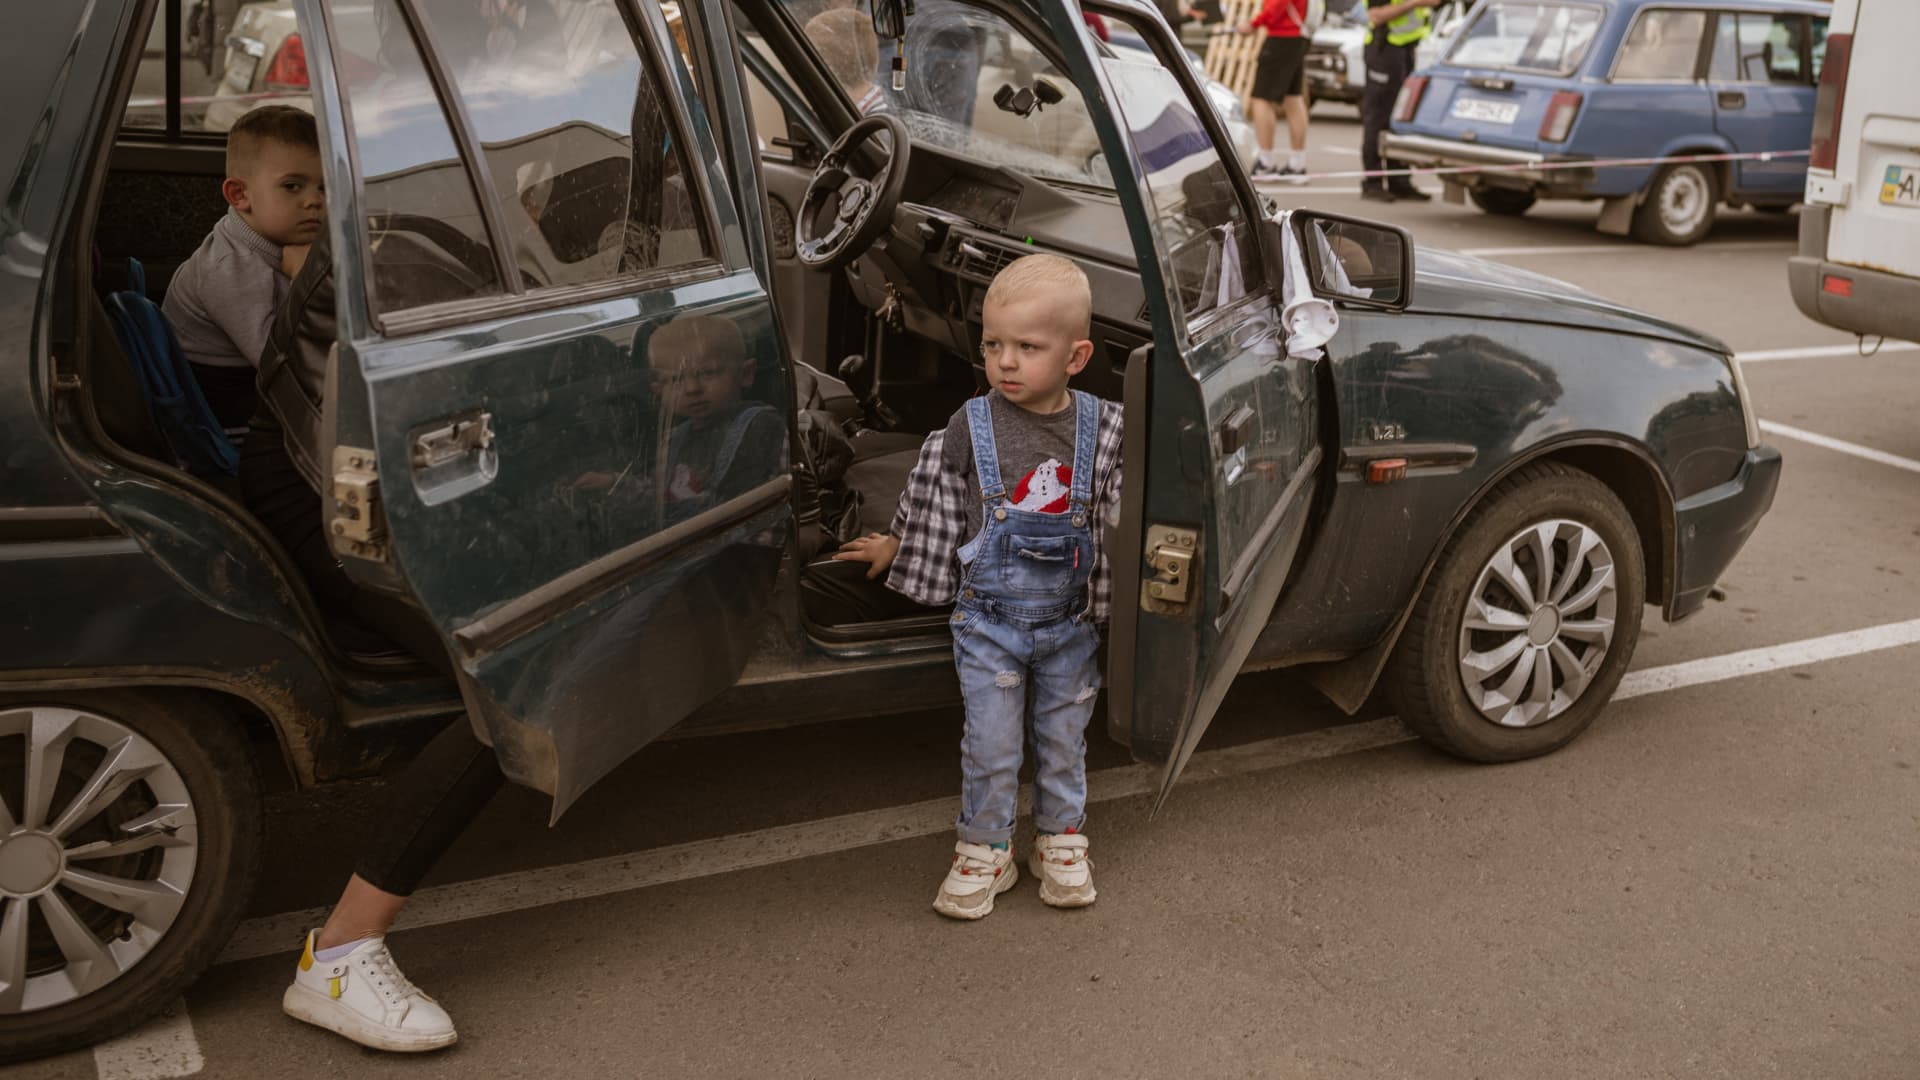 Evacuation centre that recieves people fleeing inside Zaporizhzhia region and Mariupol. Cars and vans arrive with IDPs from several cities and villages most from russian occupied territories. Family with several children.